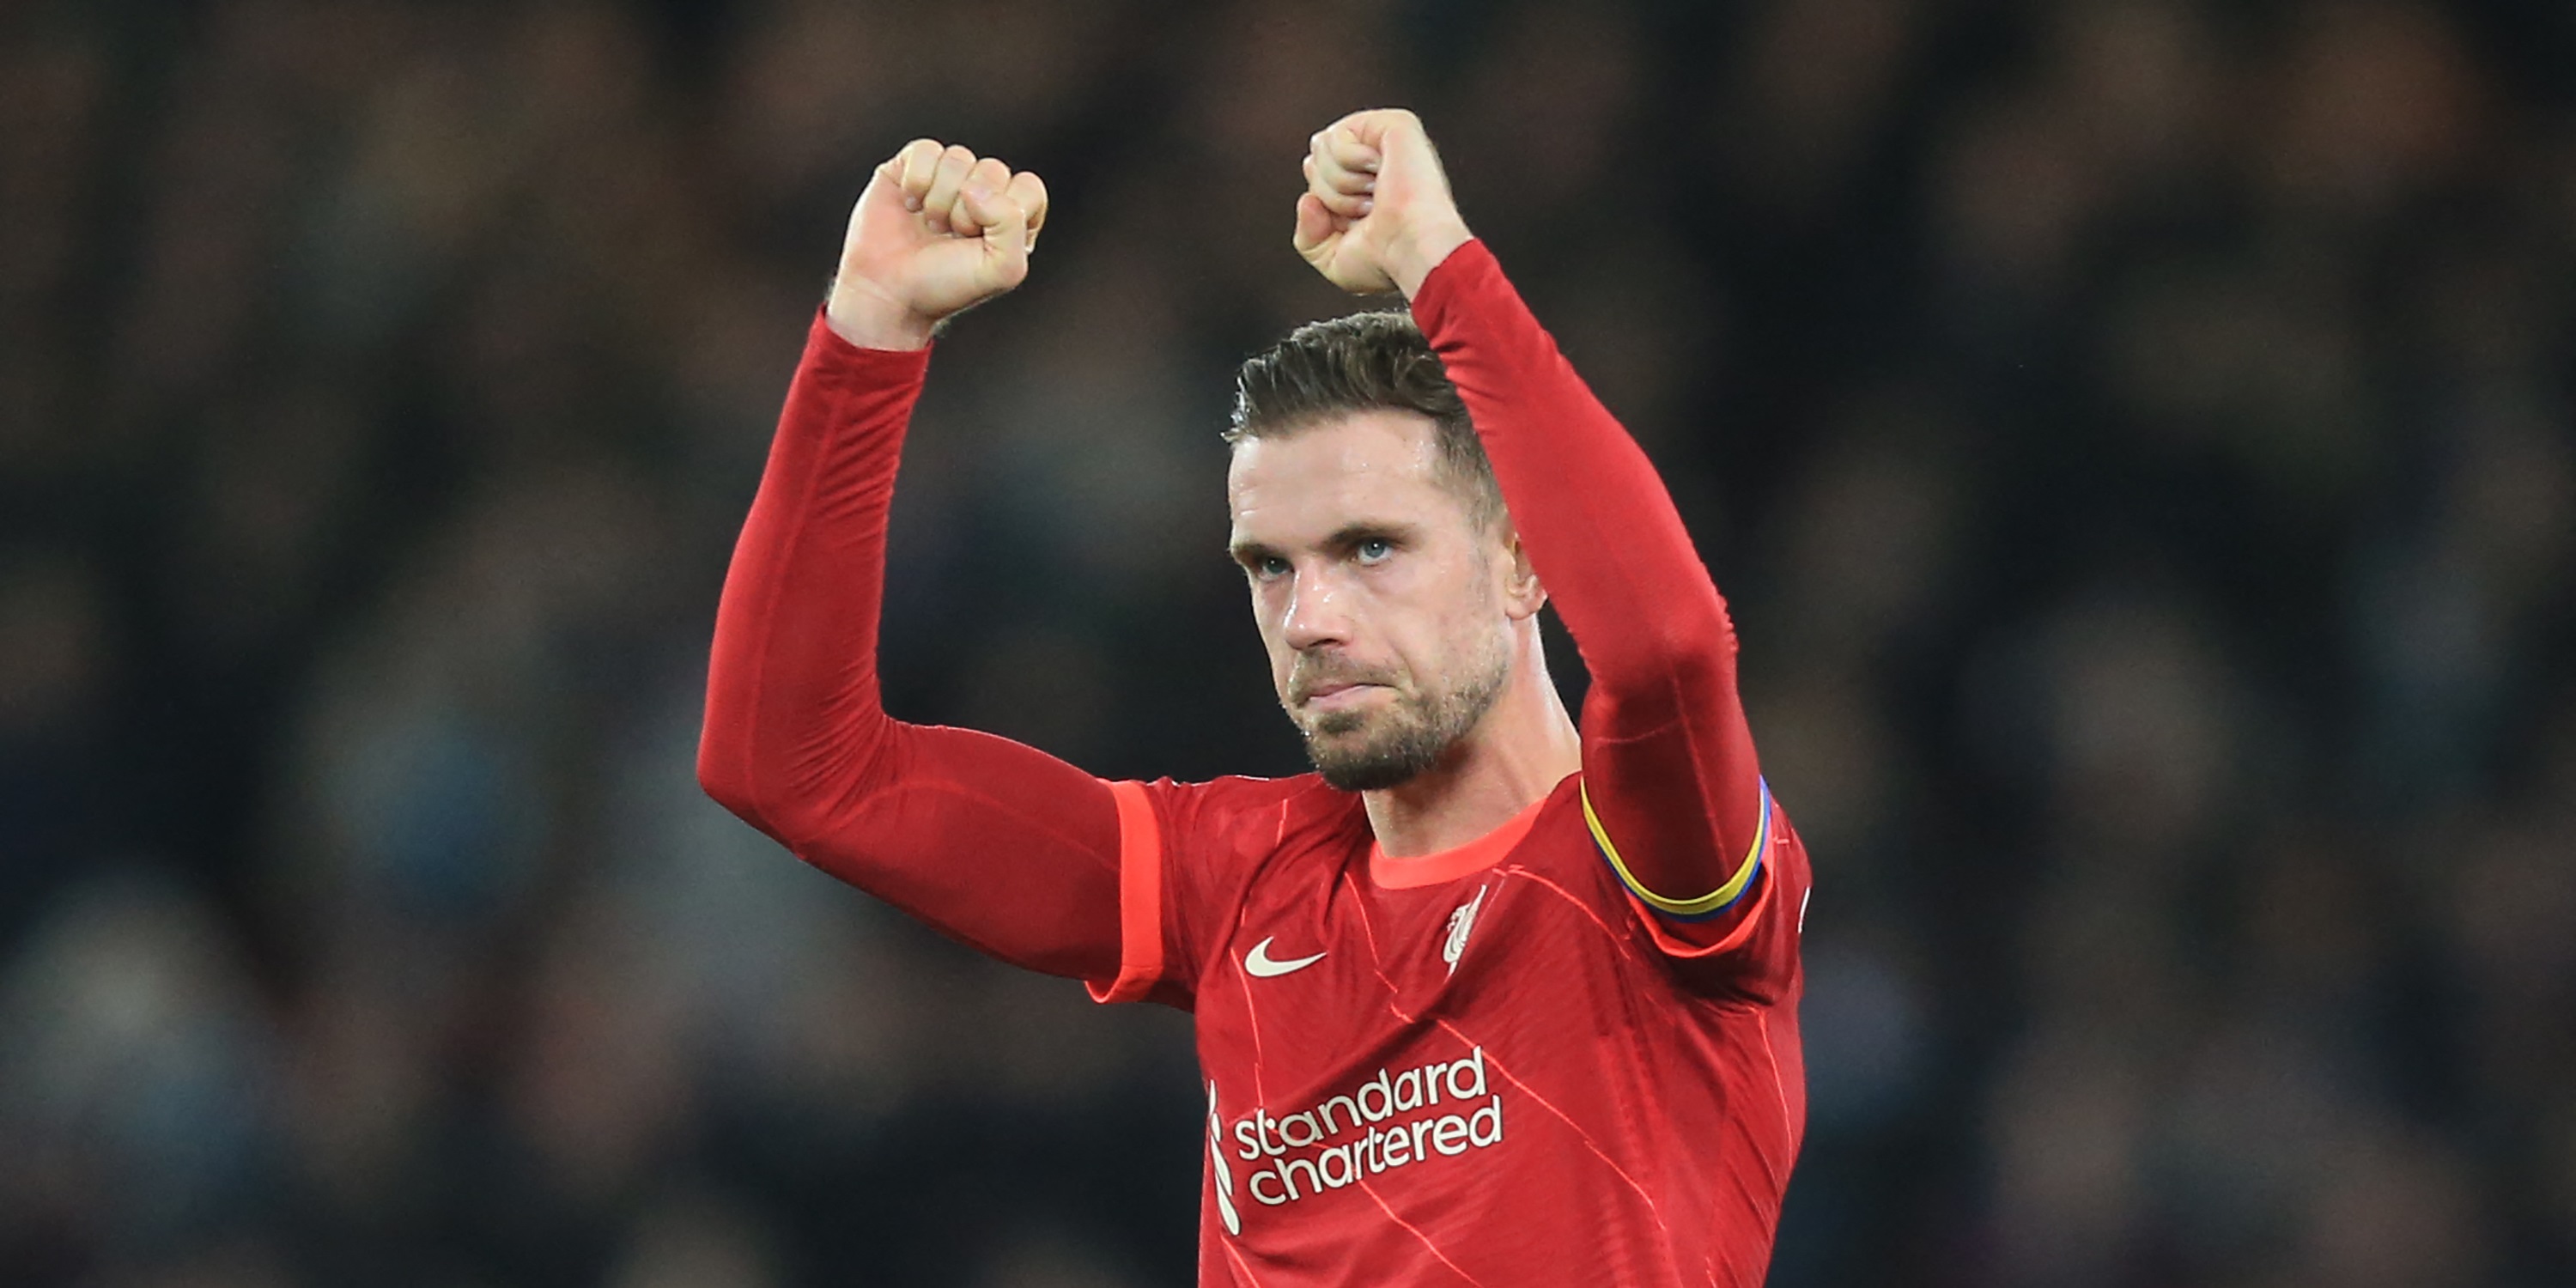 ‘Back stronger’ – Jordan Henderson on Liverpool’s extraordinary season and creating ‘more memories together’ in the future